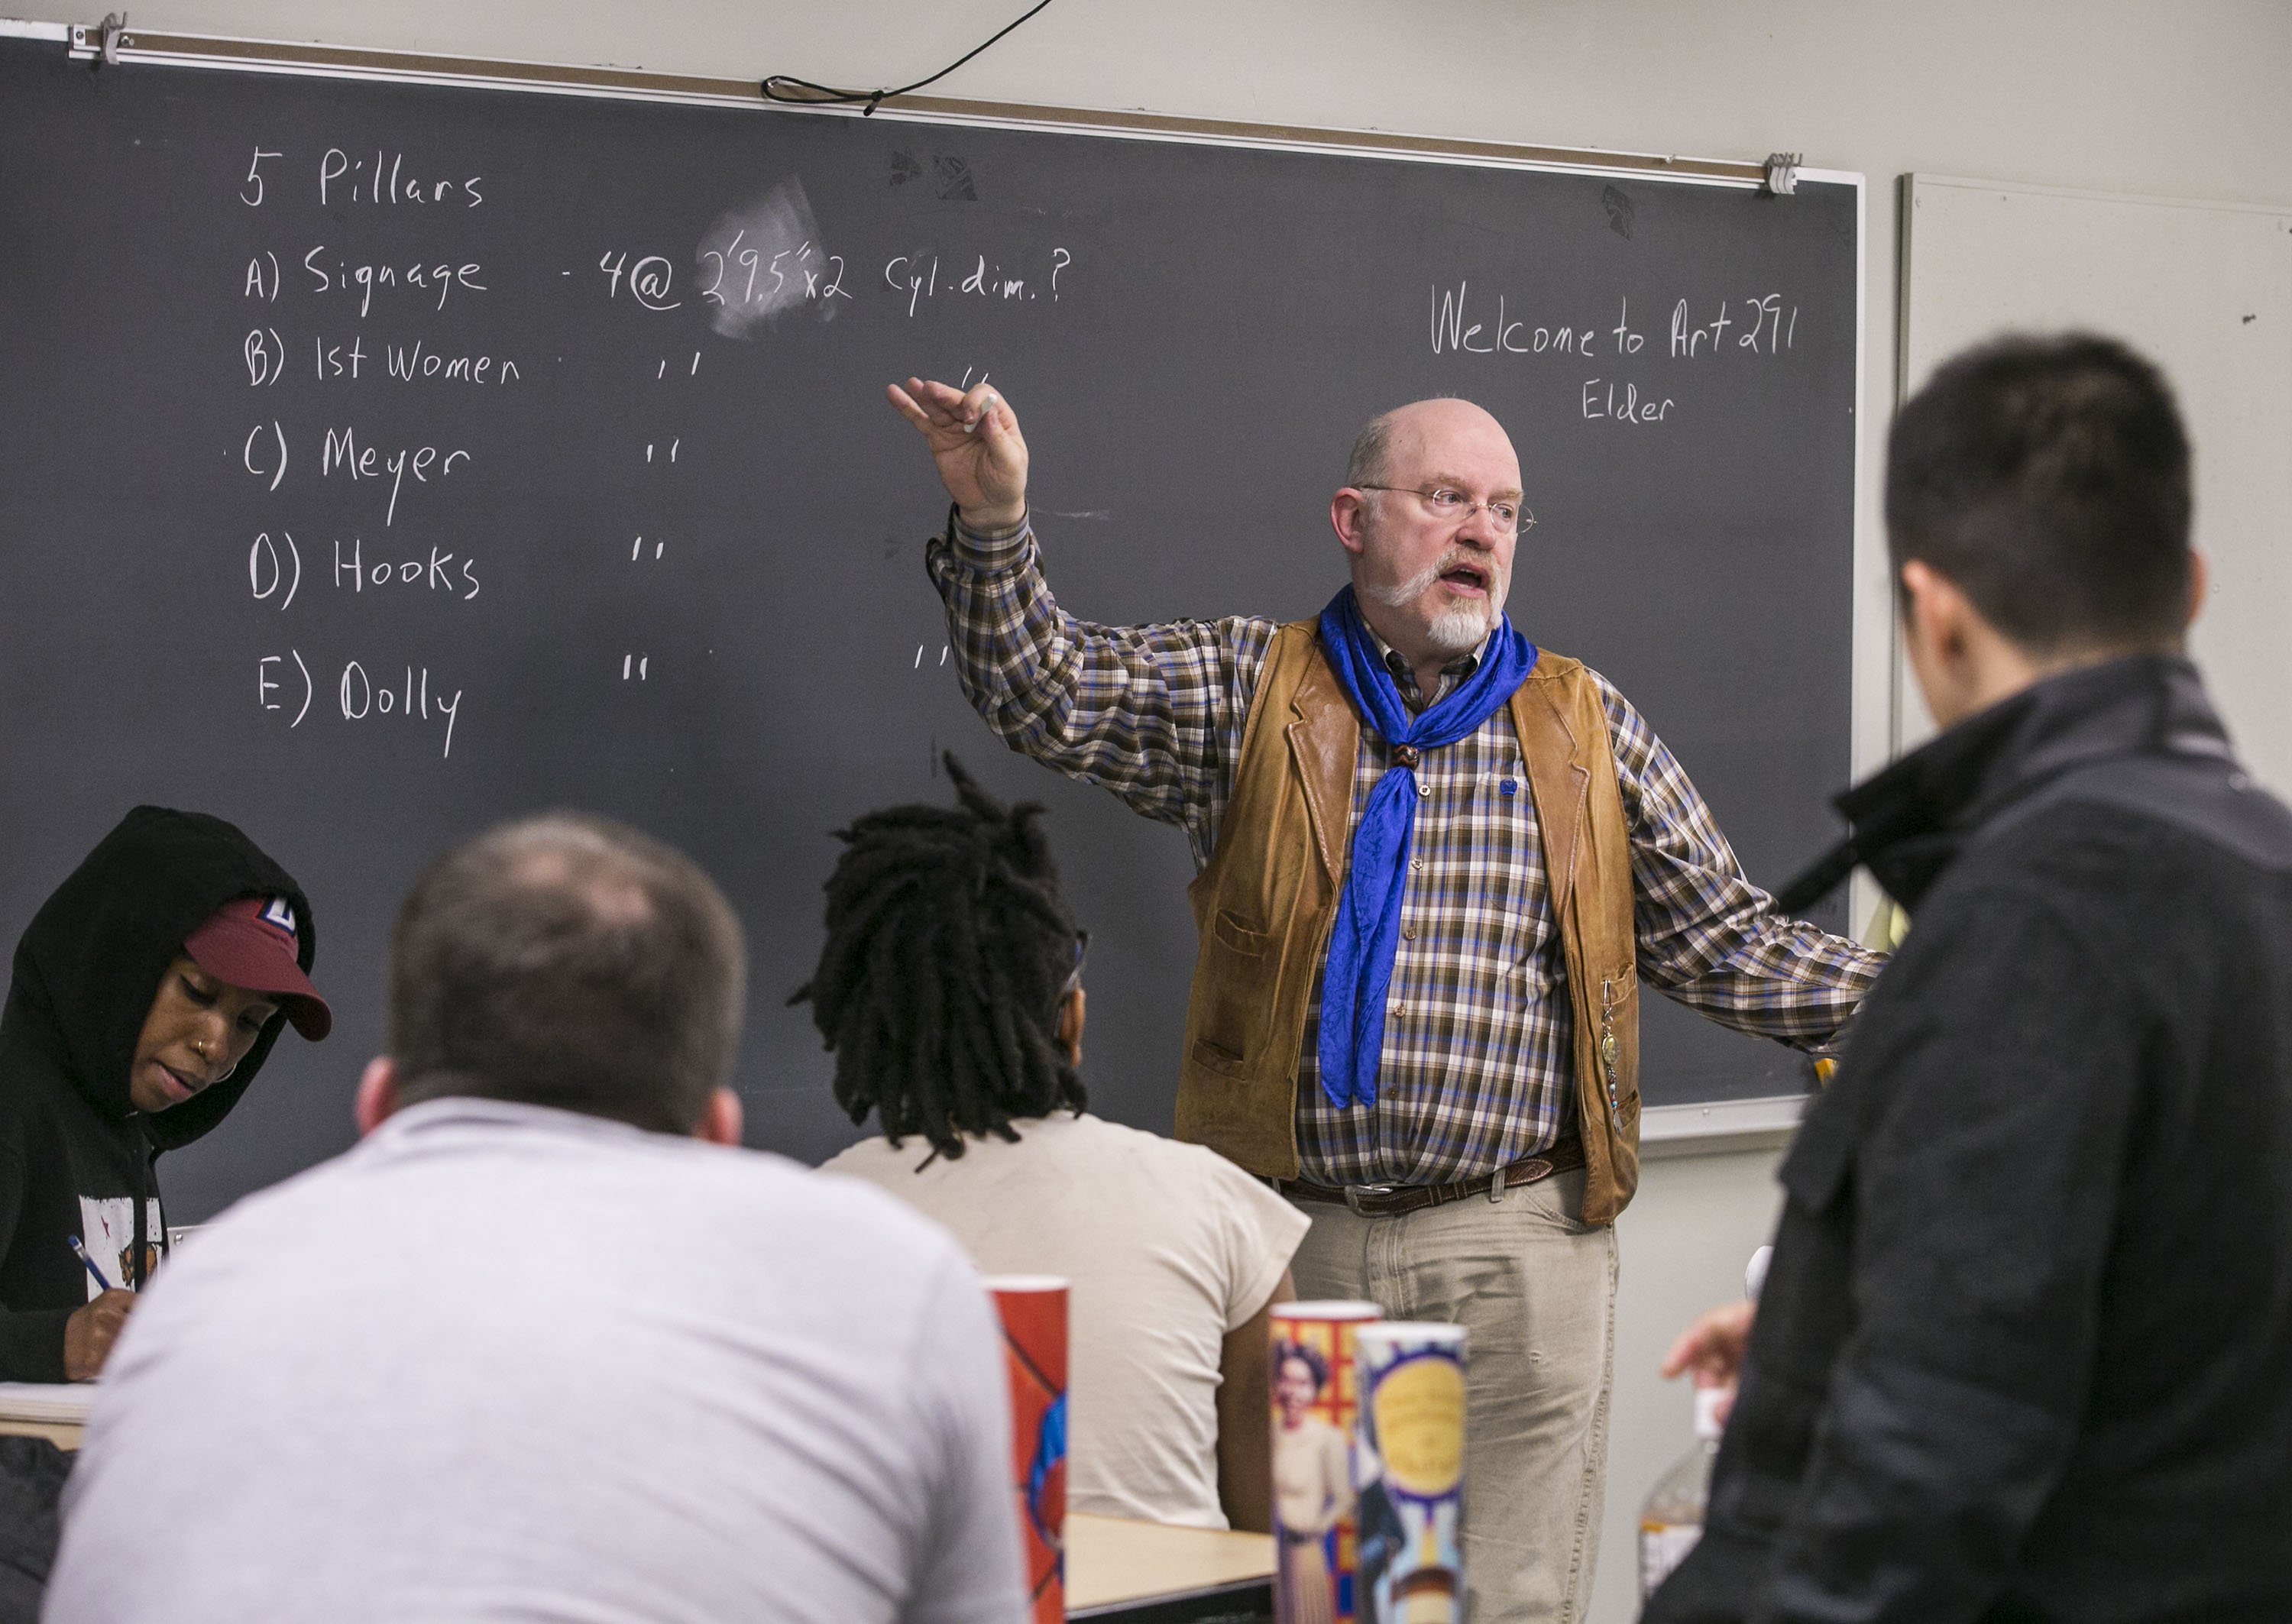 Brother Mark Elder, C.M., instructed DePaul University students on how to create and install public art. As part of their class, Elder and his students created and installed artwork depicting historical figures from DePaul's past. (DePaul University/Jamie Moncrief)